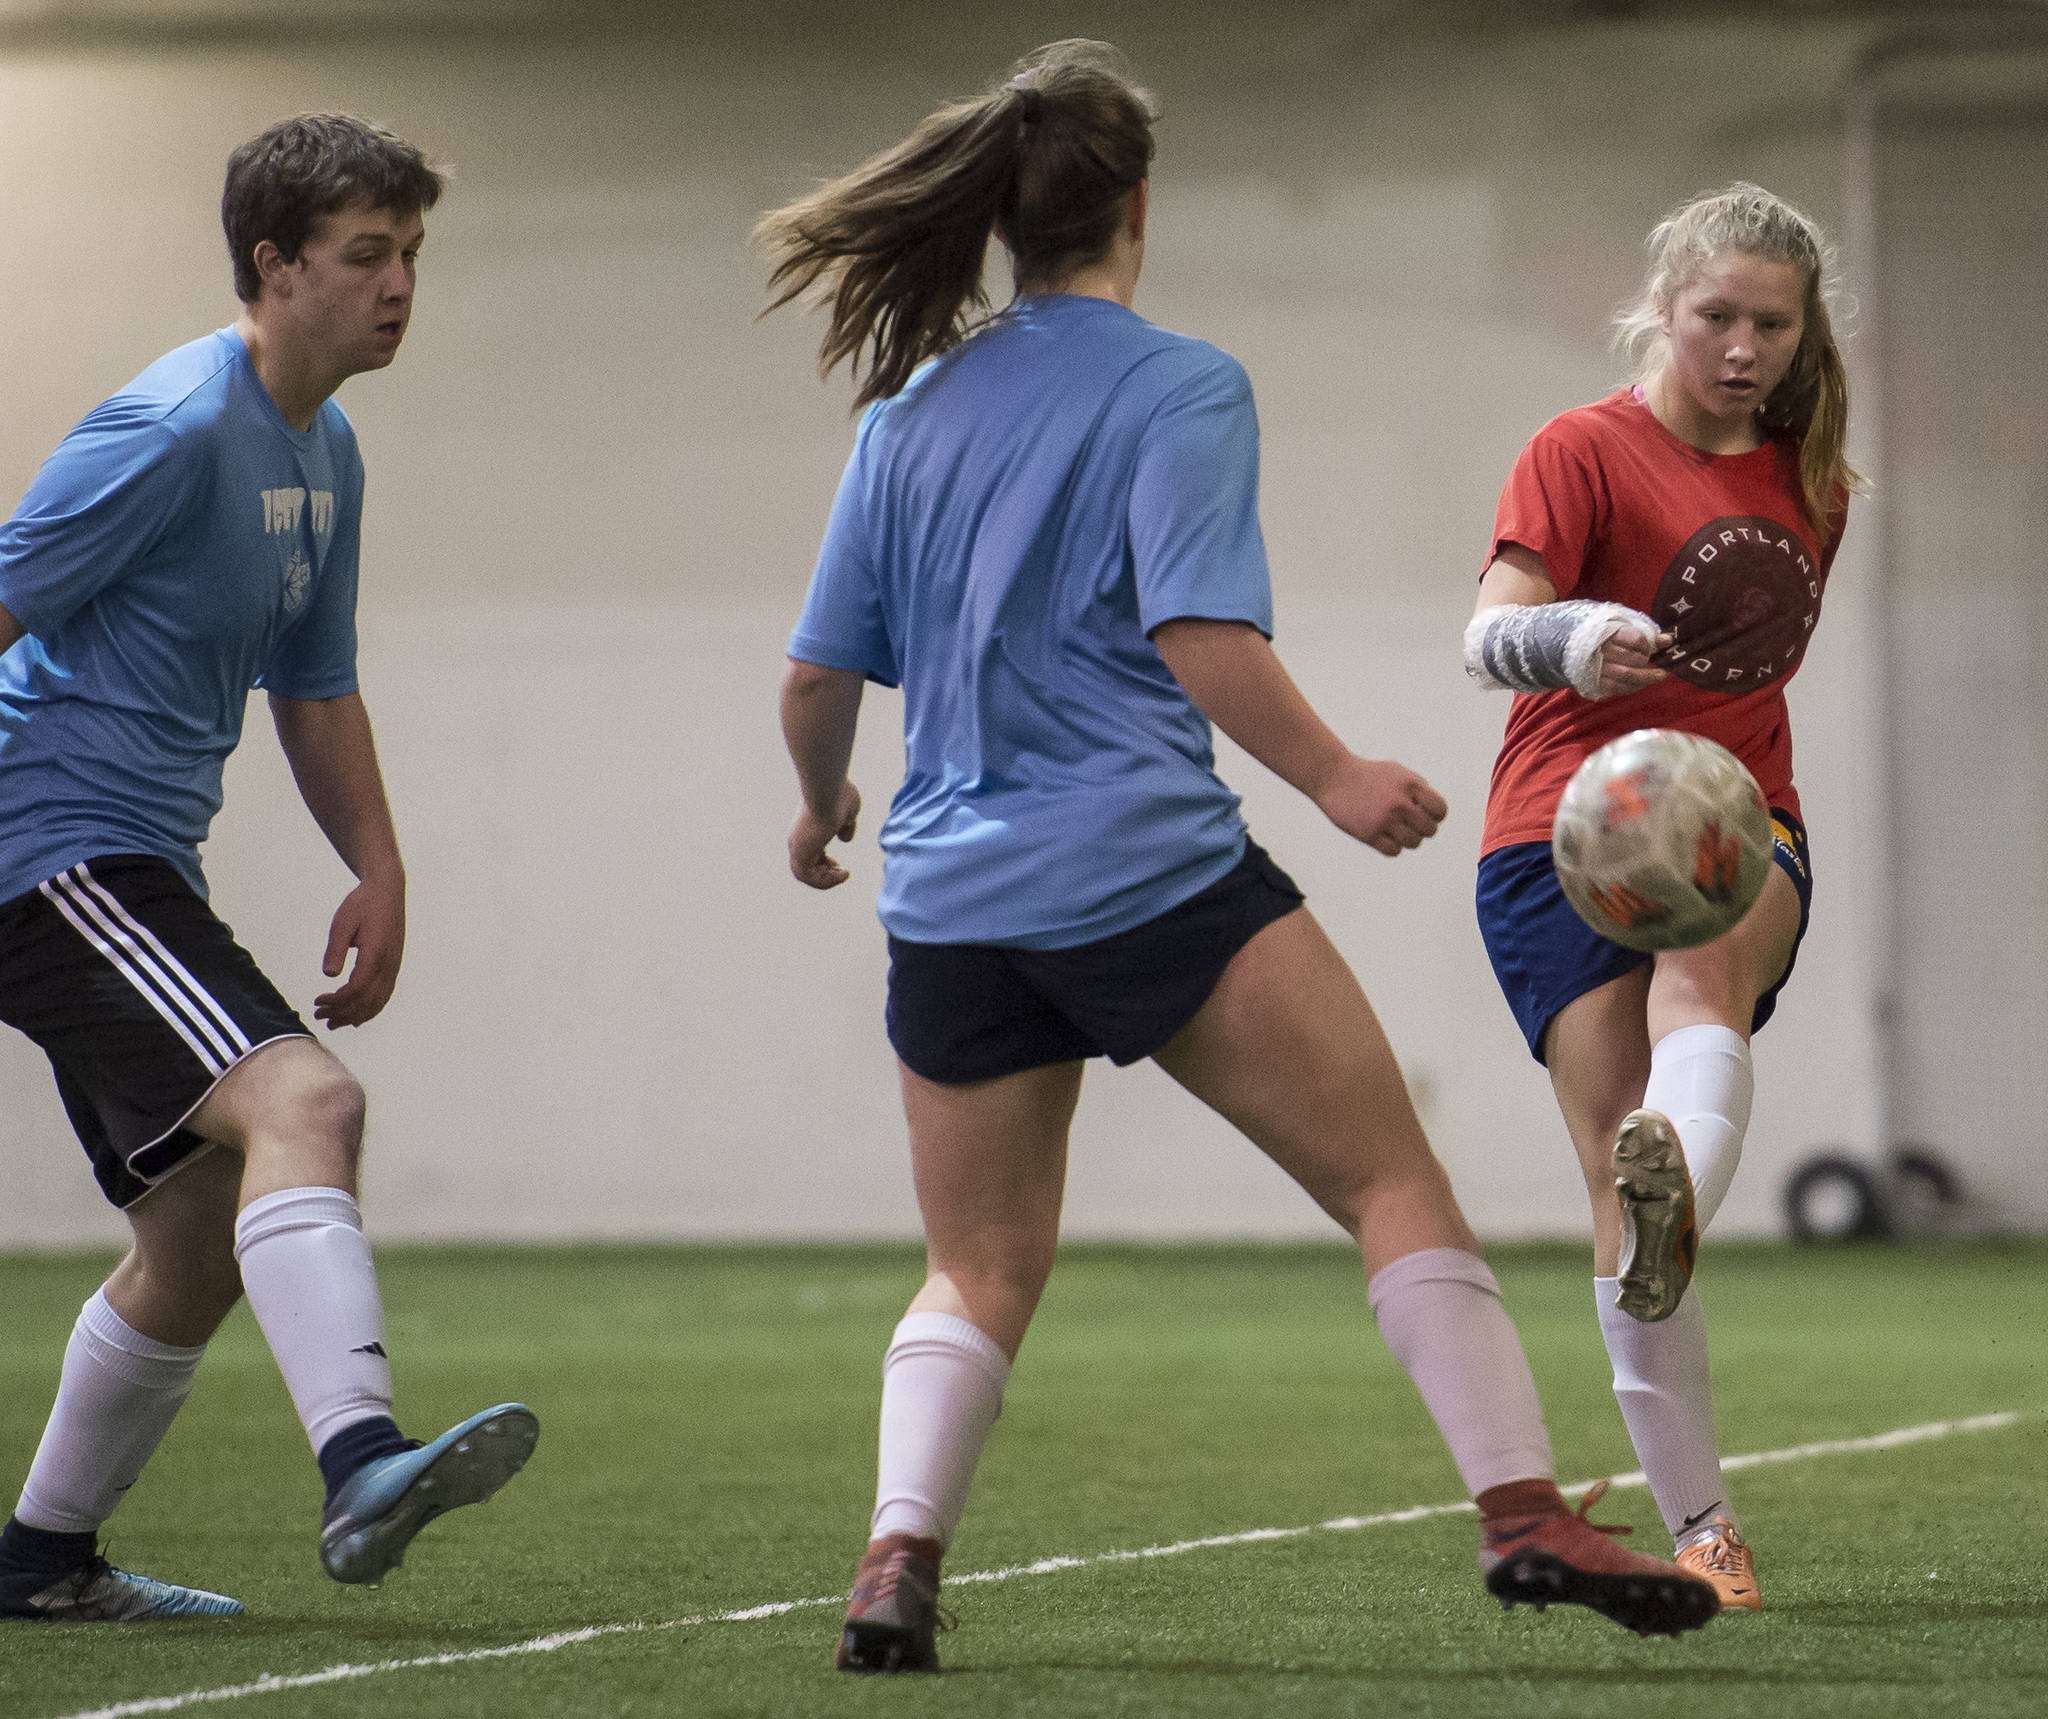 Iced Out, blue, competes against Naughty List, red, in the finals of the high school division at the annual Holiday Cup Soccer Tournament at the Wells Fargo Dimond Park Field House on Monday, Dec. 31, 2018. Iced Out won 8-2. (Michael Penn | Juneau Empire)